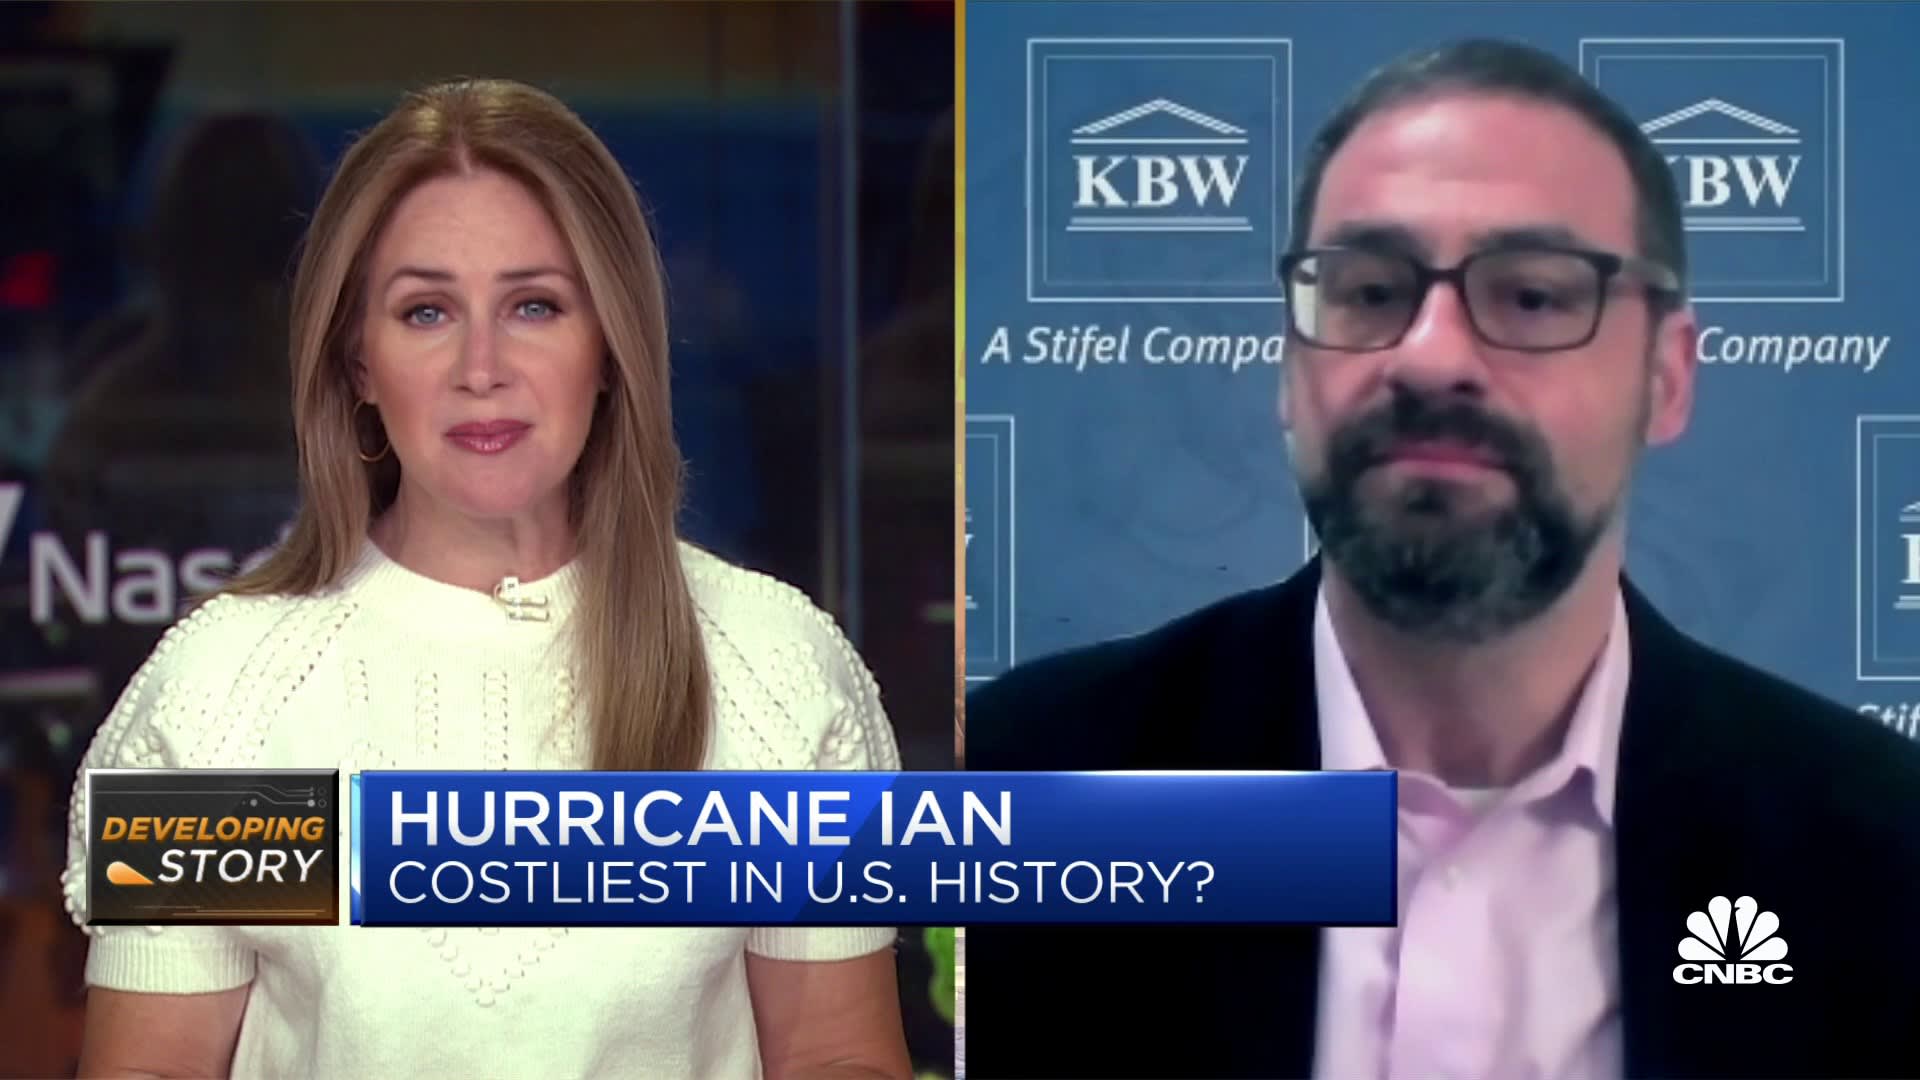 Hurricane Ian damages could be too much for some Florida insurance companies, says analyst